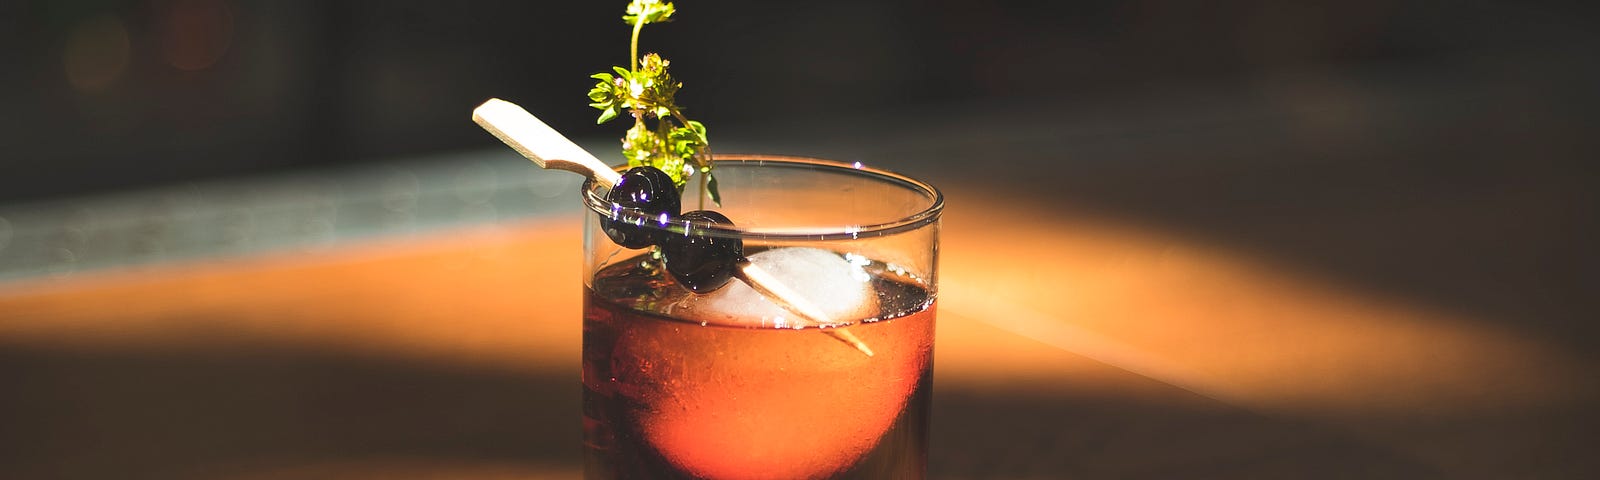 Most likely a whiskey-based cocktail with a sprig and a toothpick of olives under light